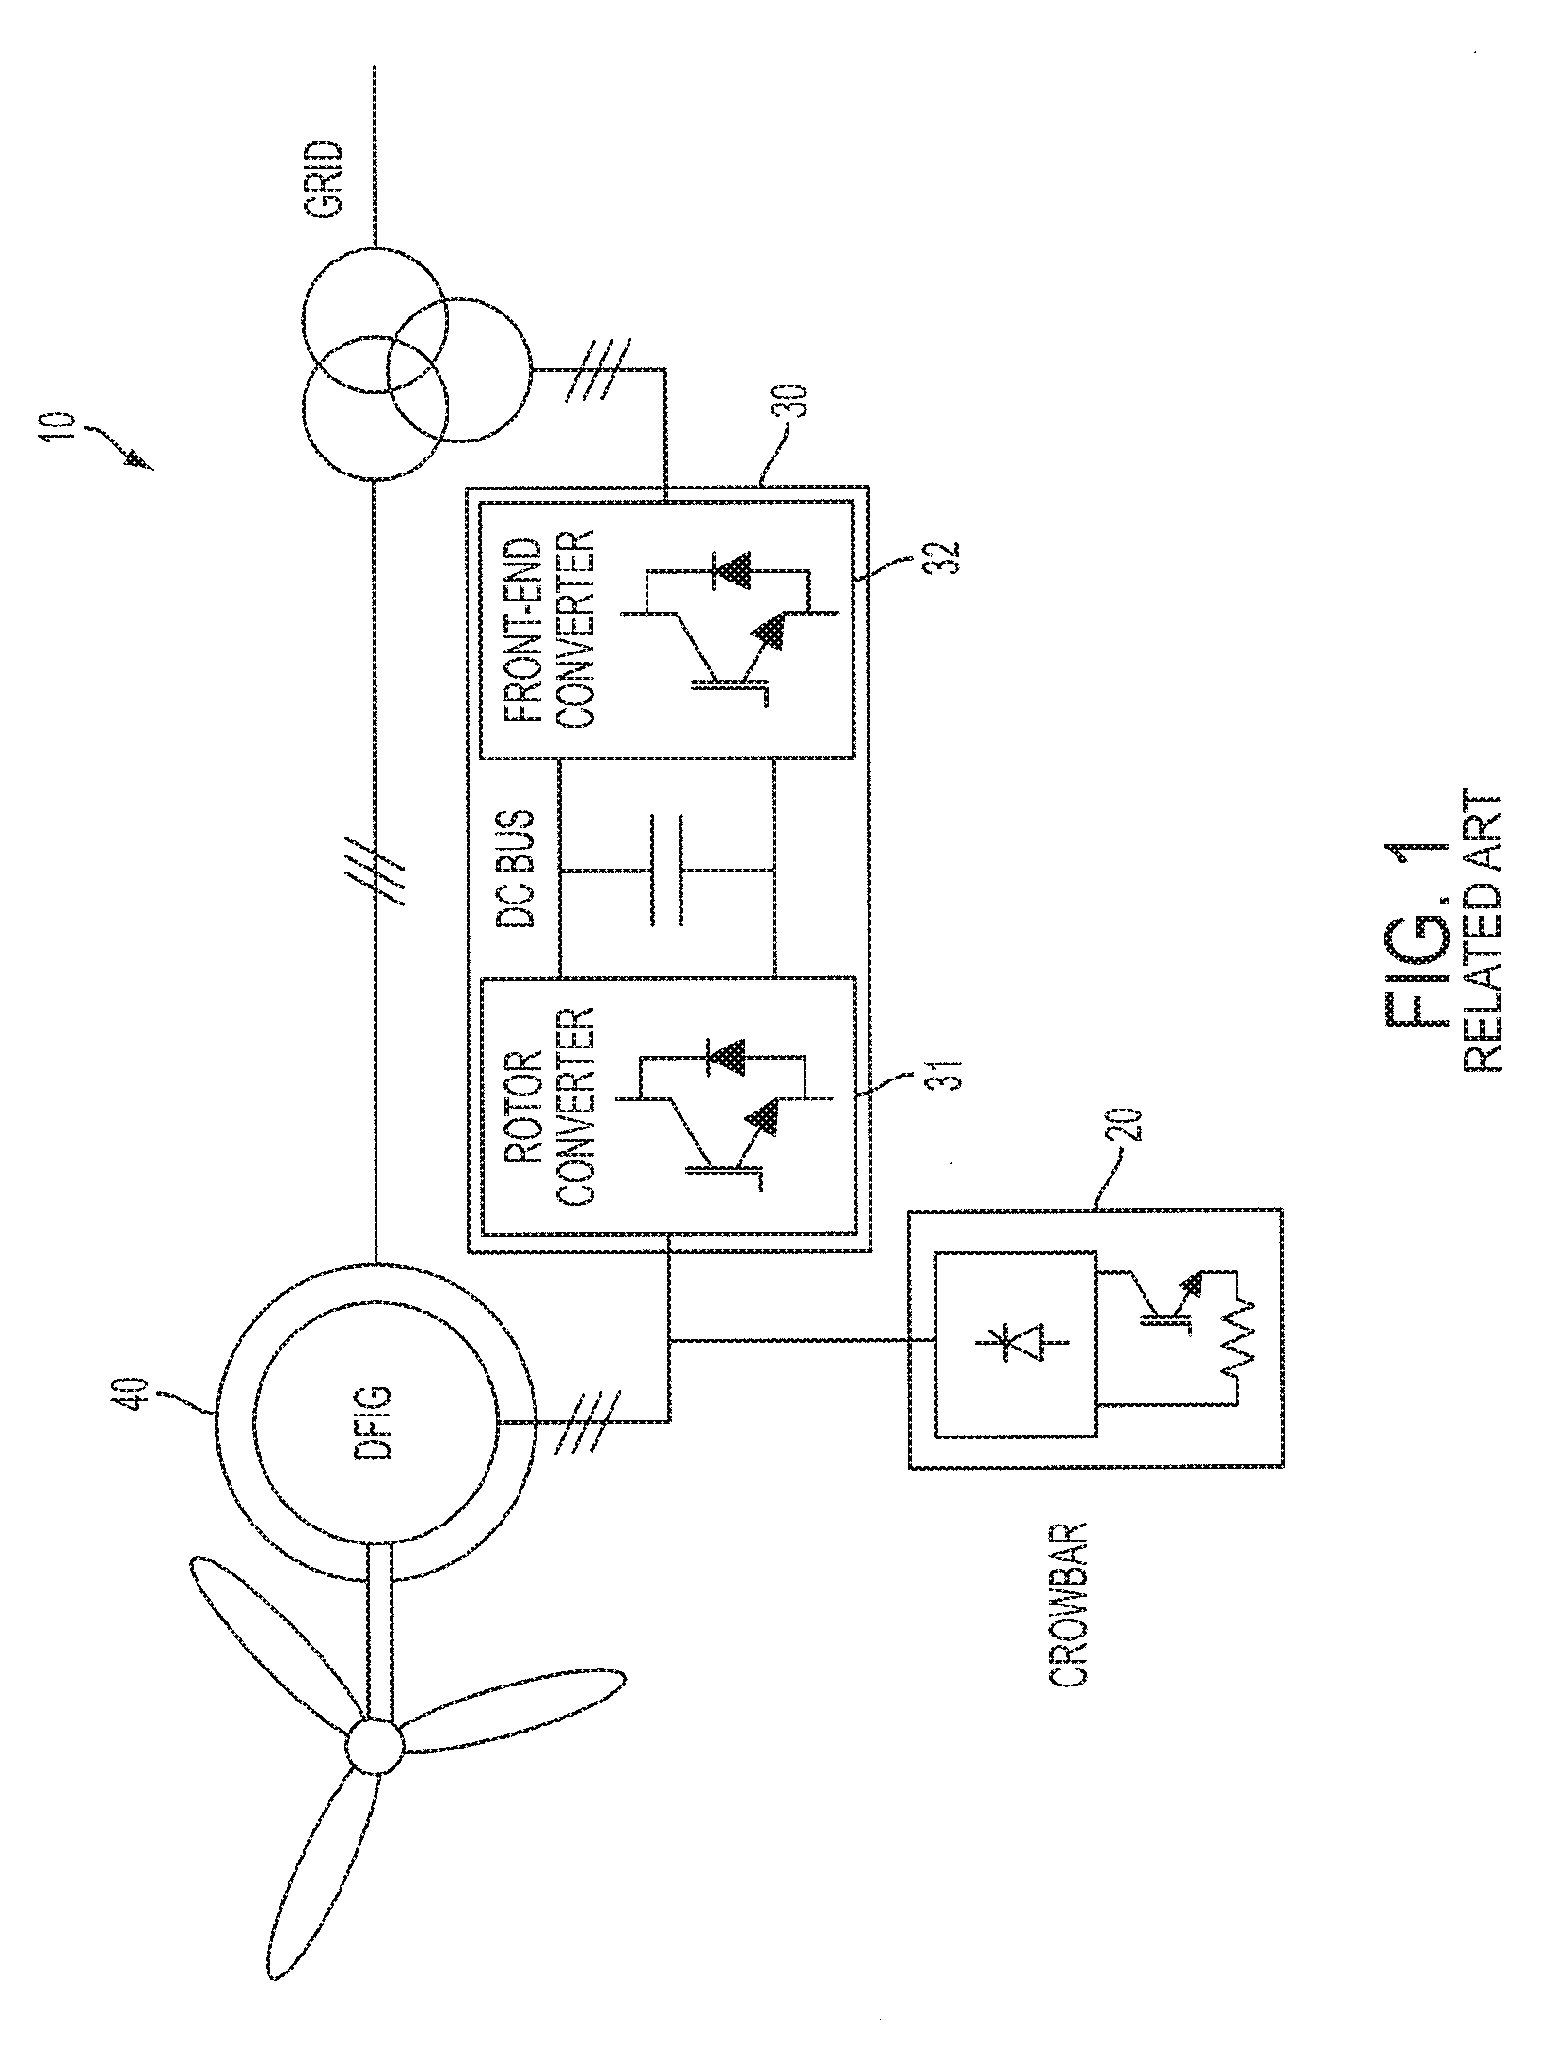 Variable impedance device for a wind turbine